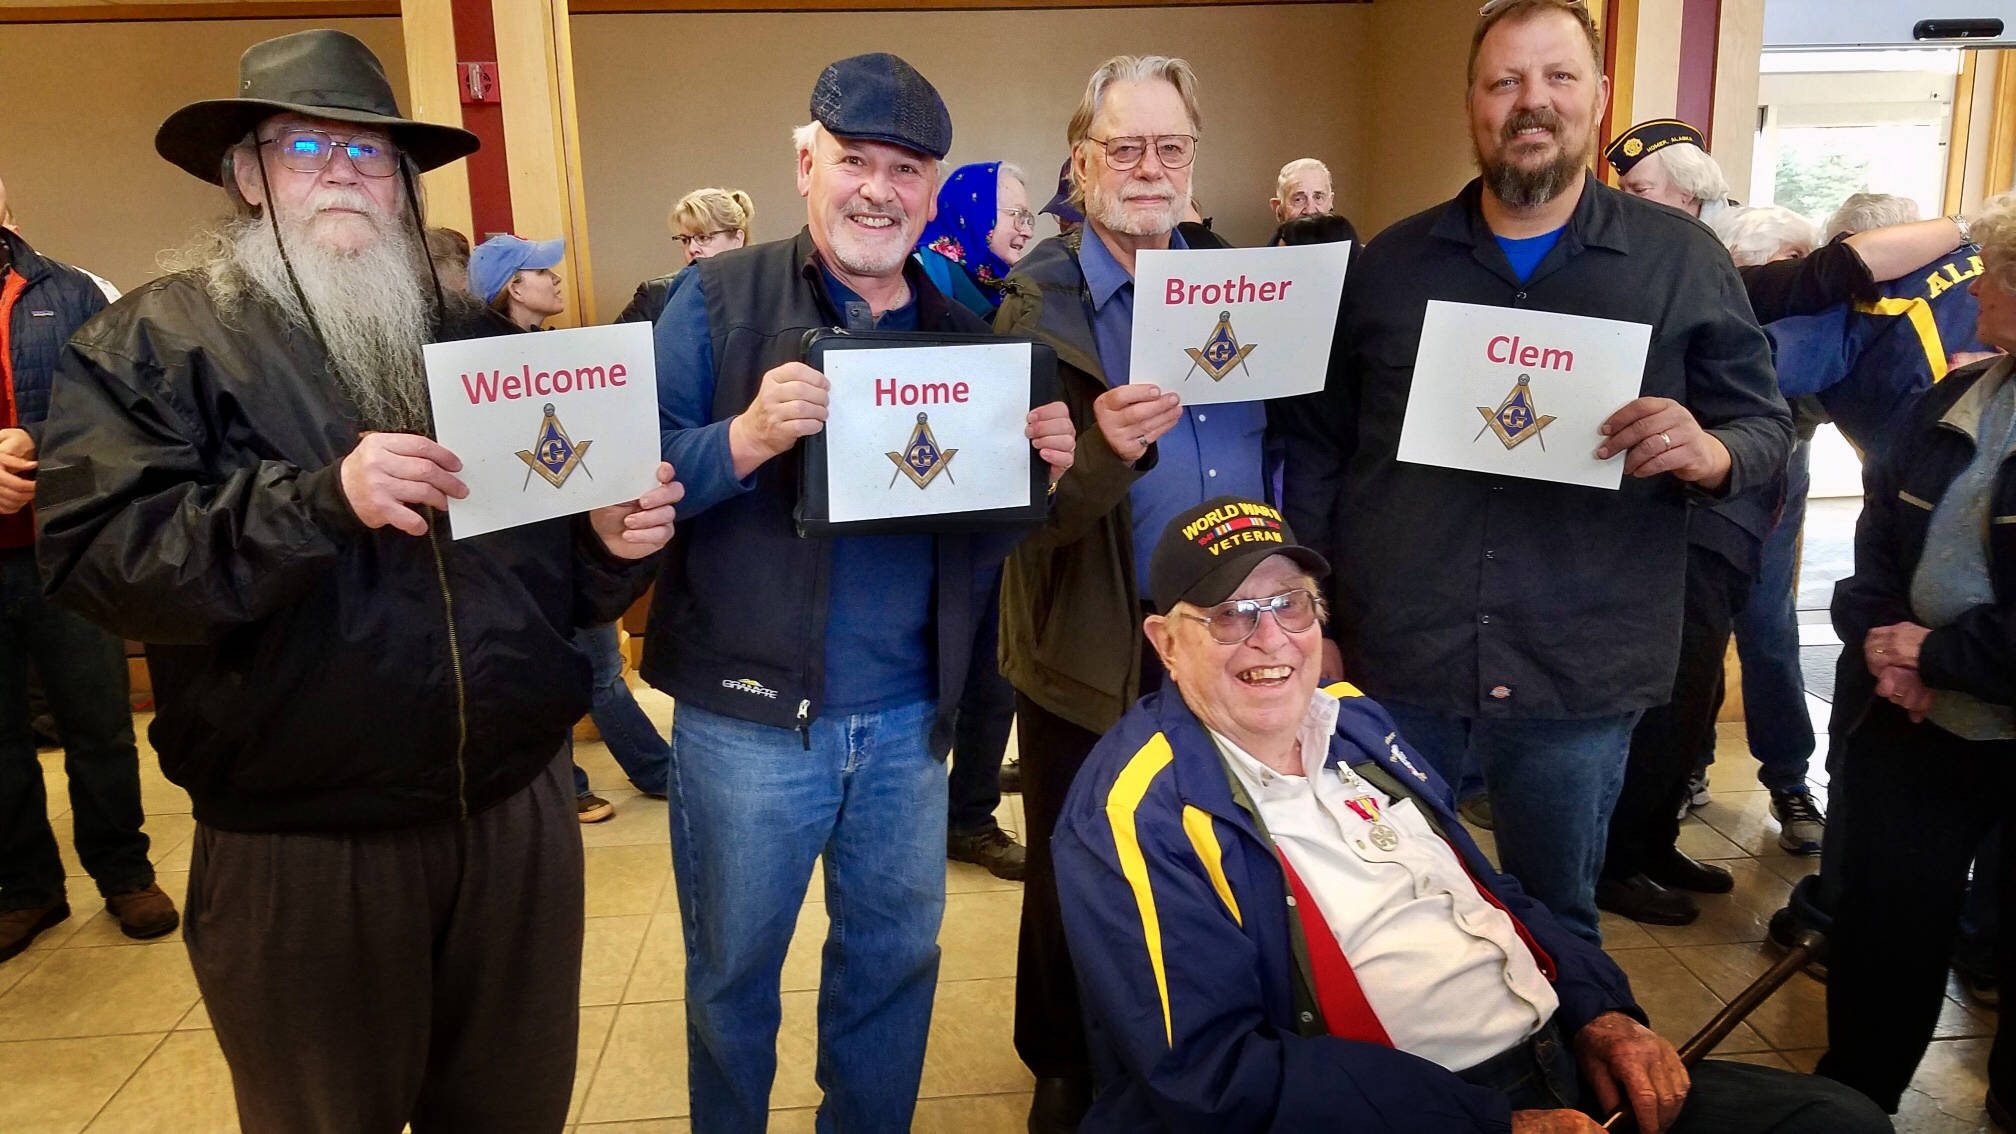 Members of the Homer Masonic Lodge turned out last Saturday, May 4, 2019, to honor World War II veteran Clem Tillion after his return on a Last Frontier Honor Flight. They also showed appreciation for his many years of Masonic service. In the photo standing behnd Tillion are, left to right, are Grady Svoboda, Tom Stroozas, Dave Spell and Greg Martin. Tillion took part in the Last Frontier Honor Flight, a trip that takes Alaska veterans to Washington, D.C. to see the sites and take in the memorials built in their honor . “It’s nice that they remember,” said Clem Tillion, a World War II veteran and former state lawmaker. Tillion remembers the war as well as anyone. As part of the Marine Corps in World War II, his journey took him to the Pacific Theater in Samoa, Guadalcanal, and elsewhere looking for unexploded ordnances. “Freedoms are won by somebody that goes out and fights for it. You don’t have anything without it,” said Tillion. “I don’t think I’m anything spectacular. I just went in, did it, and came out alive.” Tillion made the trip with mostly Korea and Vietnam veterans, 23 total on the flight. He was one of four World War II veterans on the trip. (Photo provided)